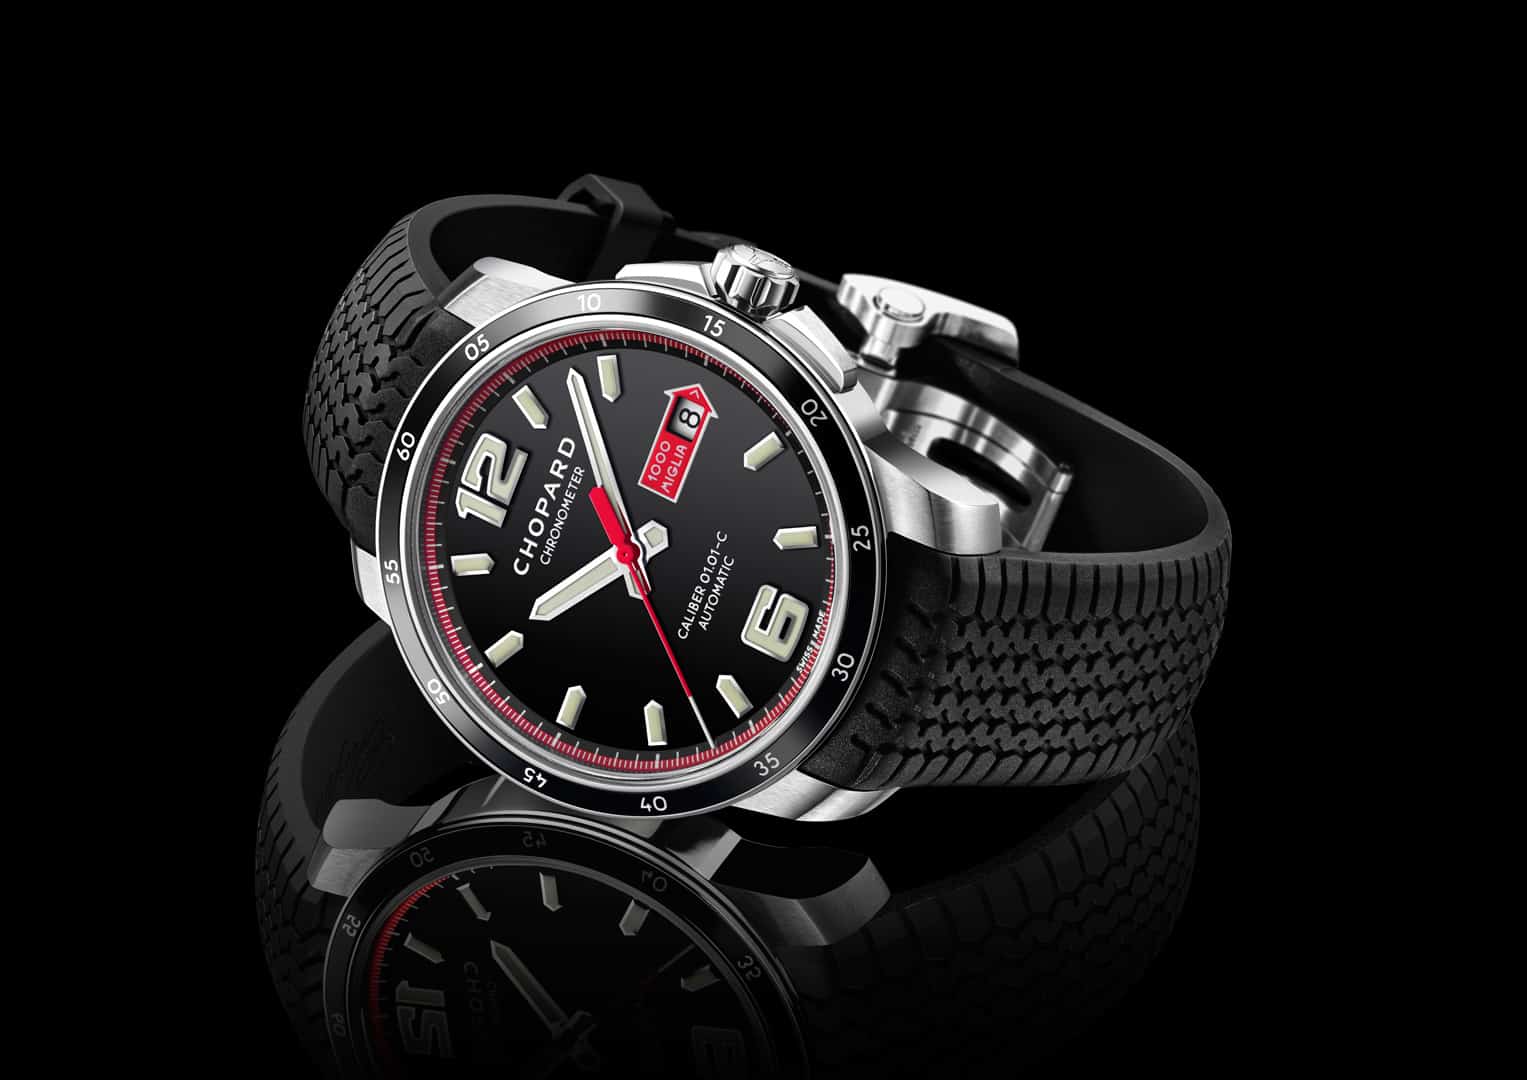 Chopard Mille Miglia GTS Automatic – Racing in style